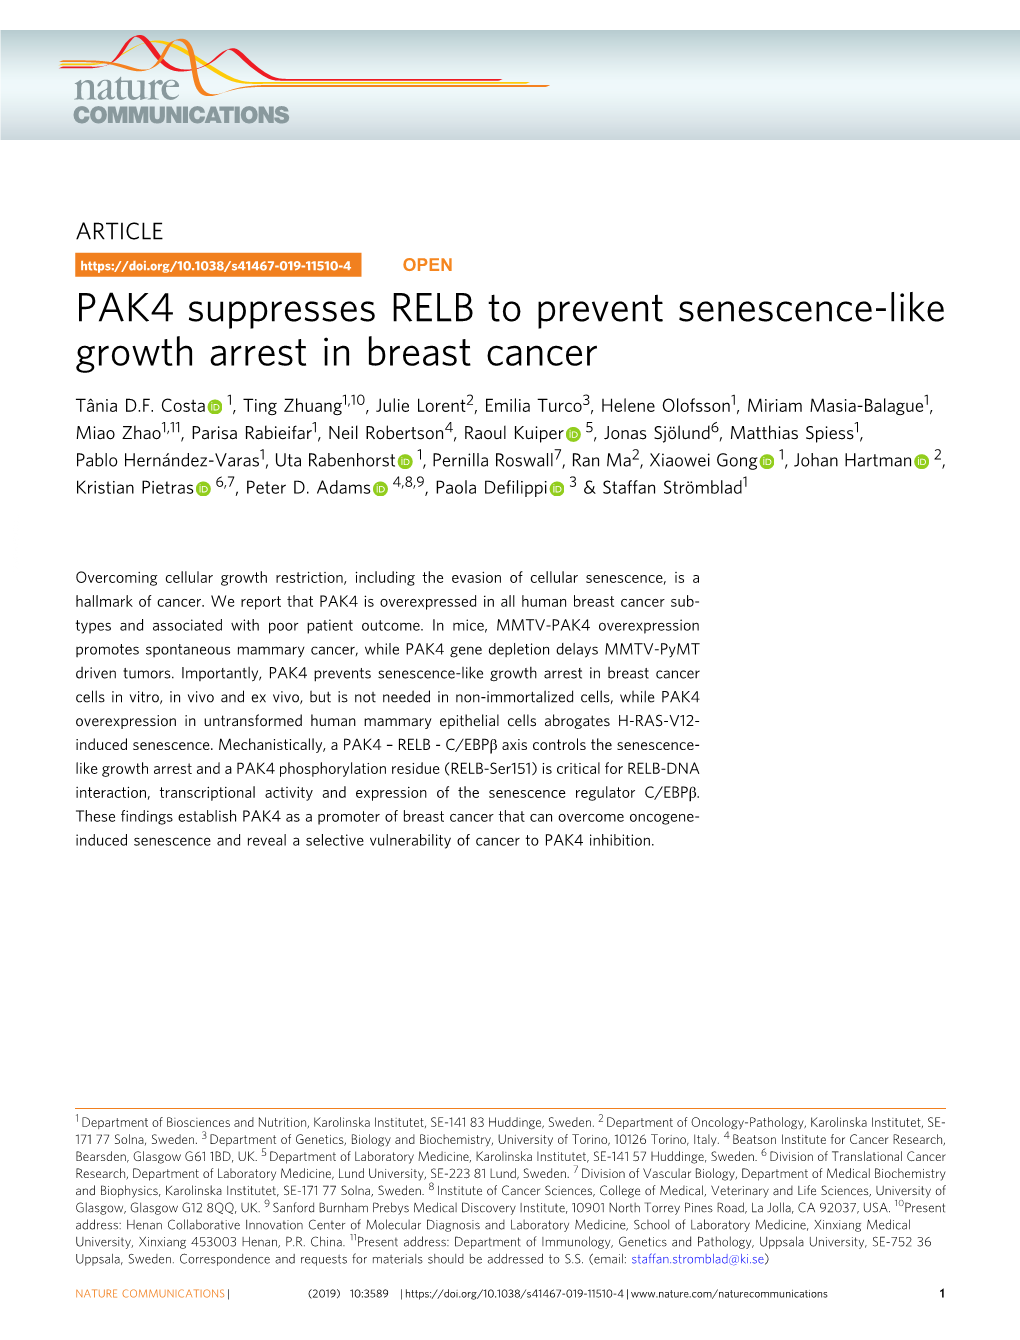 PAK4 Suppresses RELB to Prevent Senescence-Like Growth Arrest in Breast Cancer